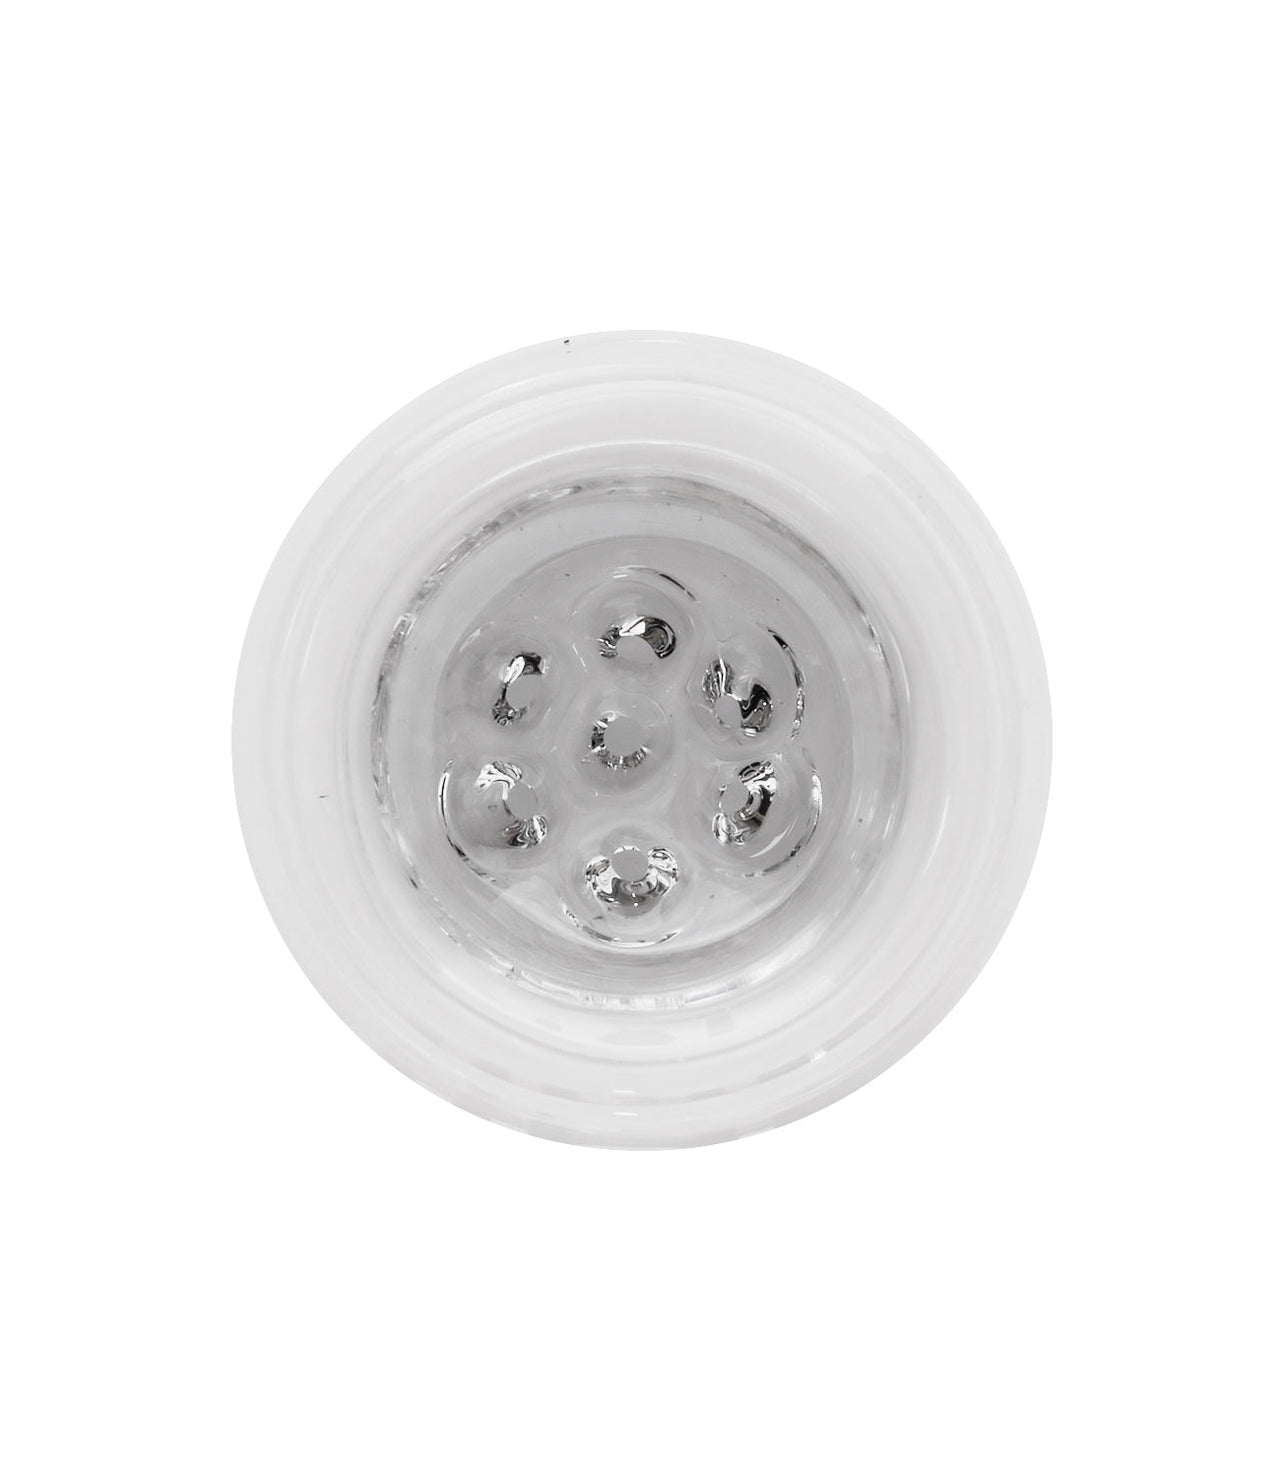 HiSi 14mm Drain Bowl | TP-Flower Accessories | 420 Science